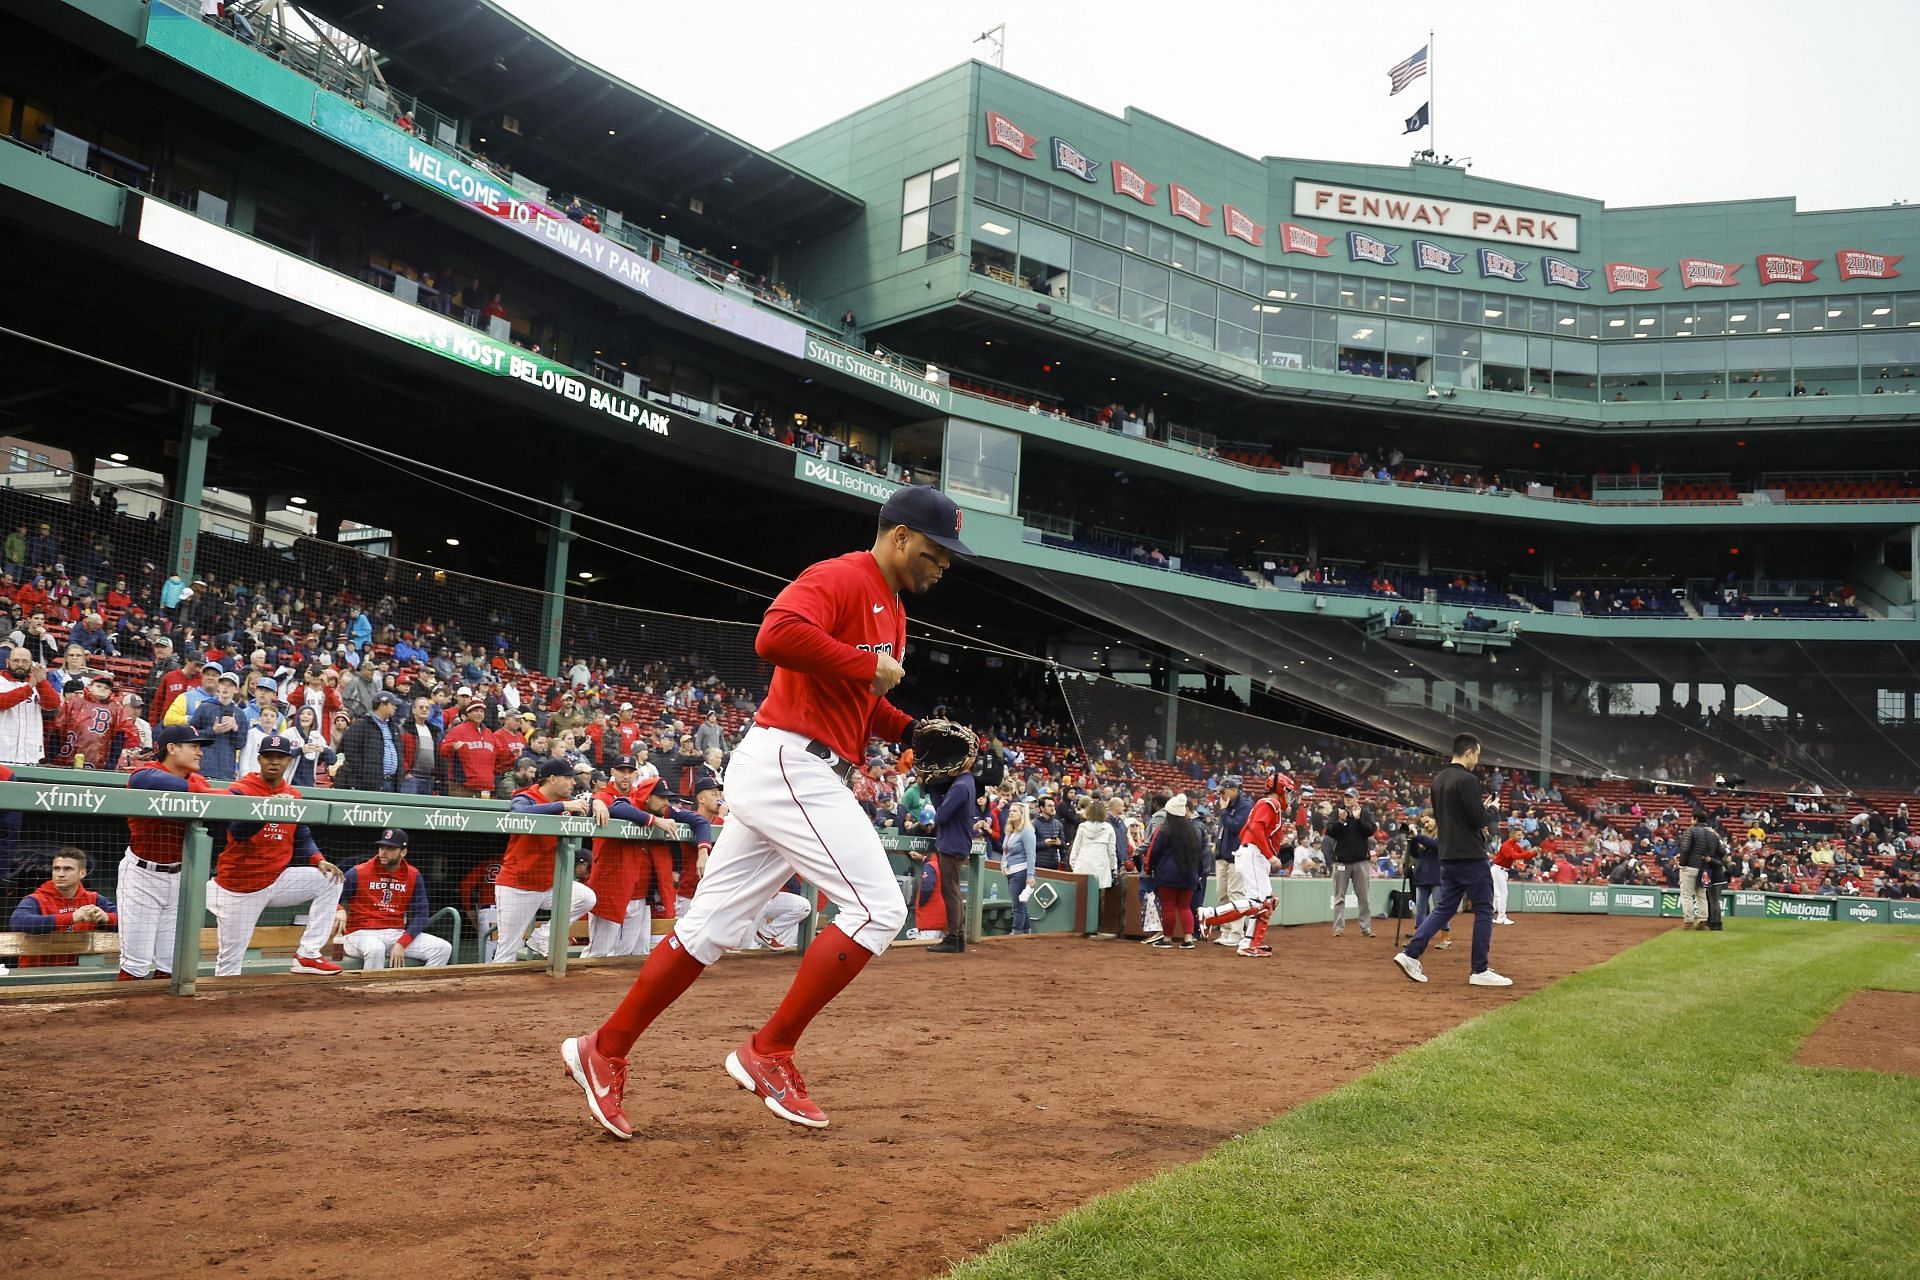 Xander Bogaerts takes the field for the last game of the season at Fenway Park